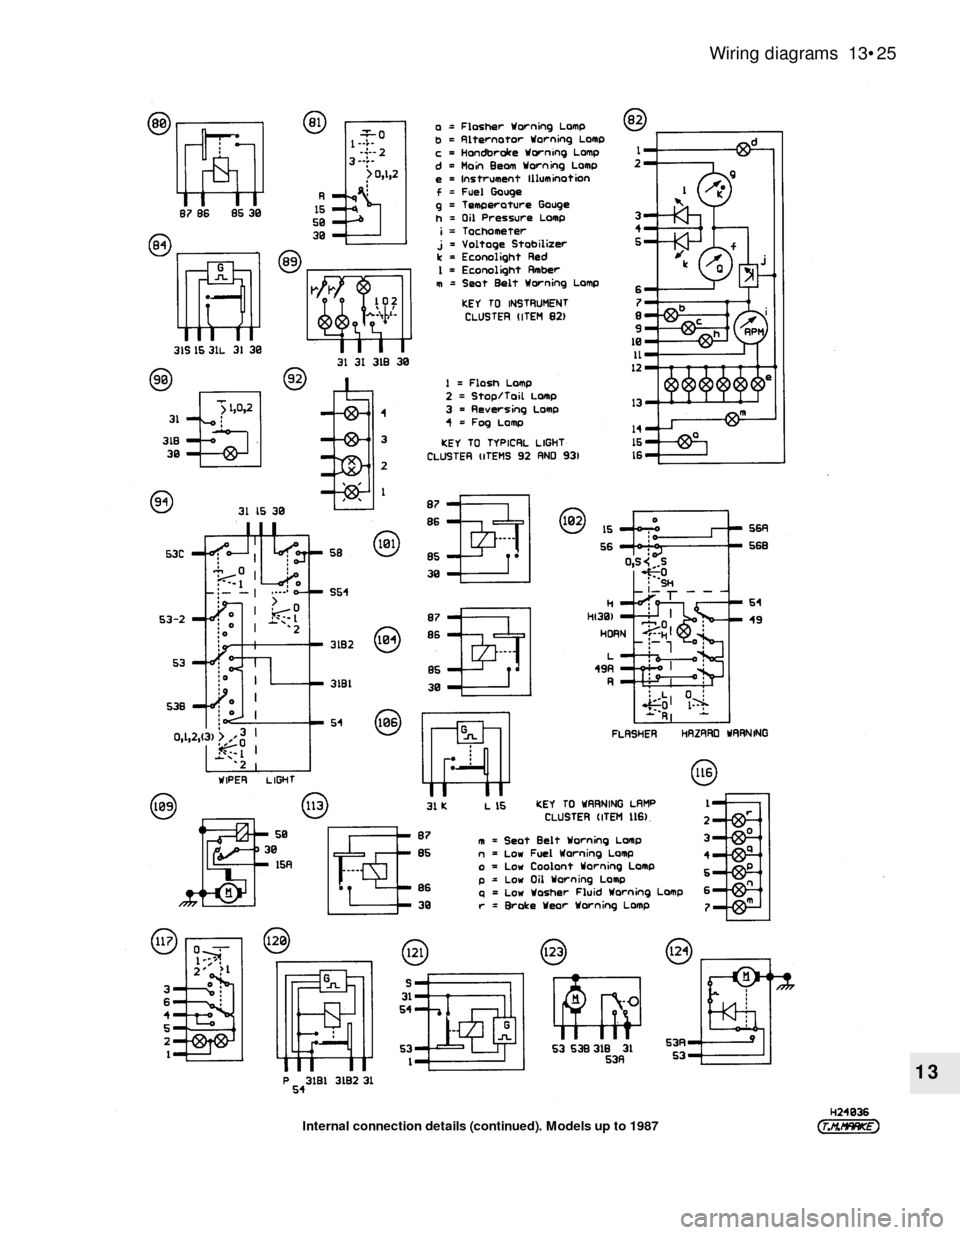 FORD SIERRA 1983 1.G Body Electrical System Workshop Manual Wiring diagrams  13•25
13
Internal connection details (continued). Models up to 1987 